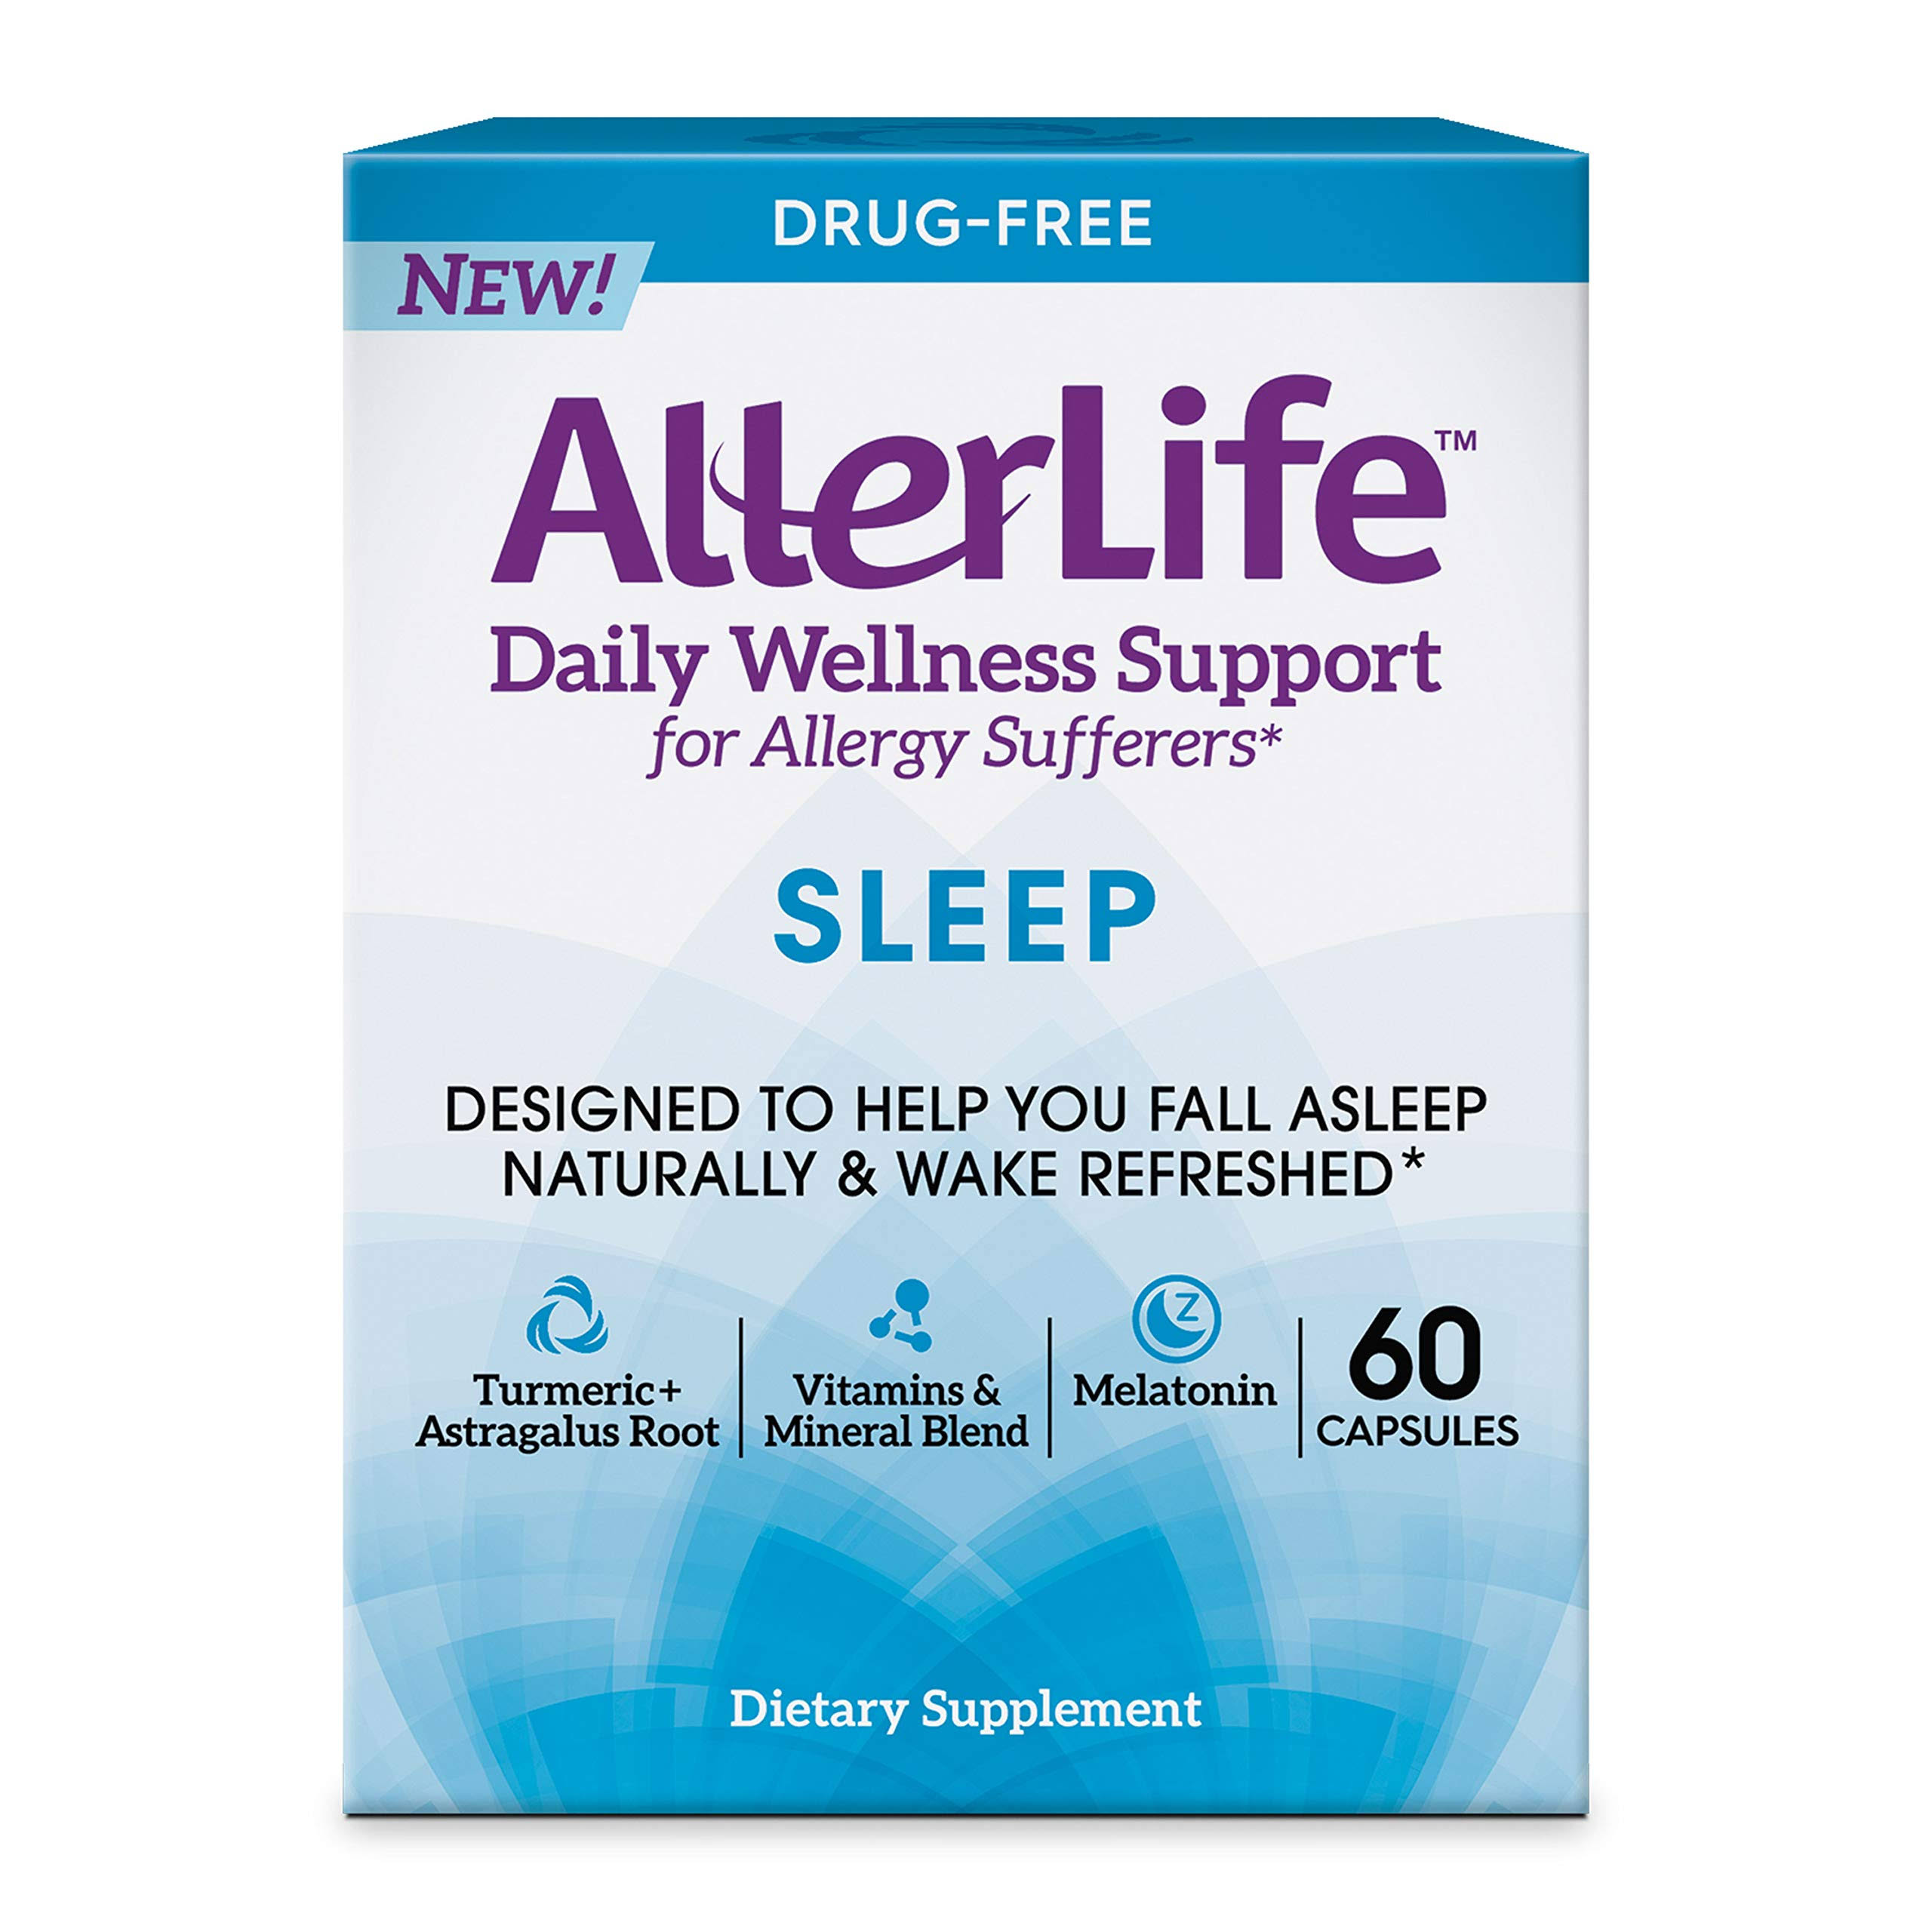 AllerLife Sleep Daily Wellness Support, 60 Capsules, For Allergy Sufferers